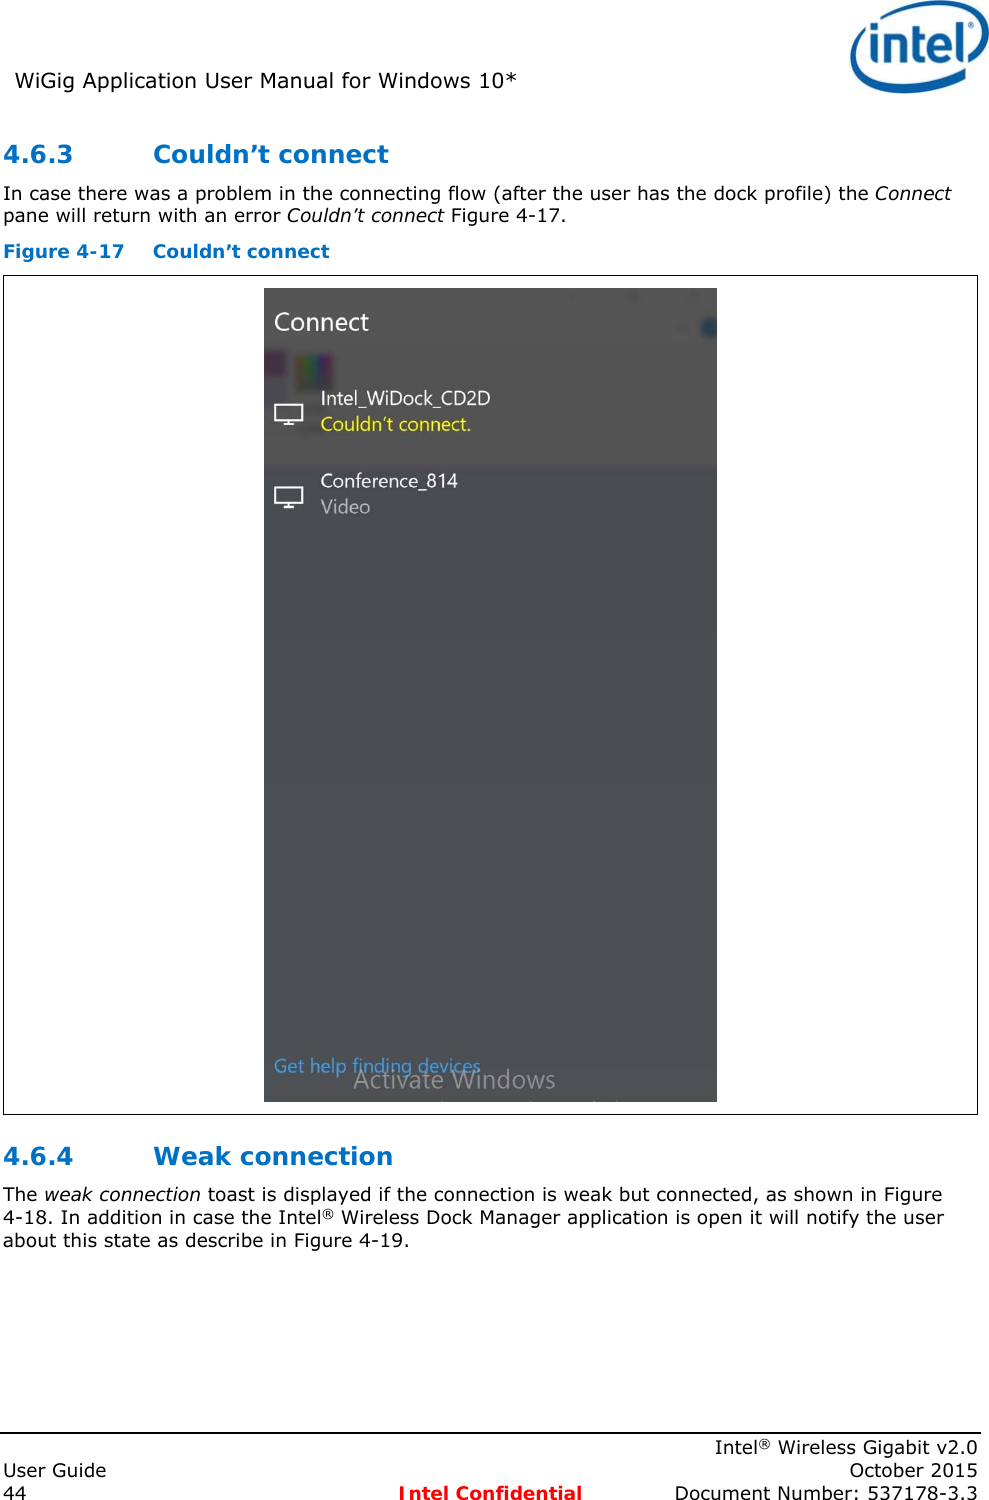 WiGig Application User Manual for Windows 10*      Intel® Wireless Gigabit v2.0 User Guide    October 2015 44 Intel Confidential  Document Number: 537178-3.3 4.6.3 Couldn’t connect In case there was a problem in the connecting flow (after the user has the dock profile) the Connect pane will return with an error Couldn’t connect Figure 4-17. Figure 4-17  Couldn’t connect  4.6.4 Weak connection The weak connection toast is displayed if the connection is weak but connected, as shown in Figure 4-18. In addition in case the Intel® Wireless Dock Manager application is open it will notify the user about this state as describe in Figure 4-19. 